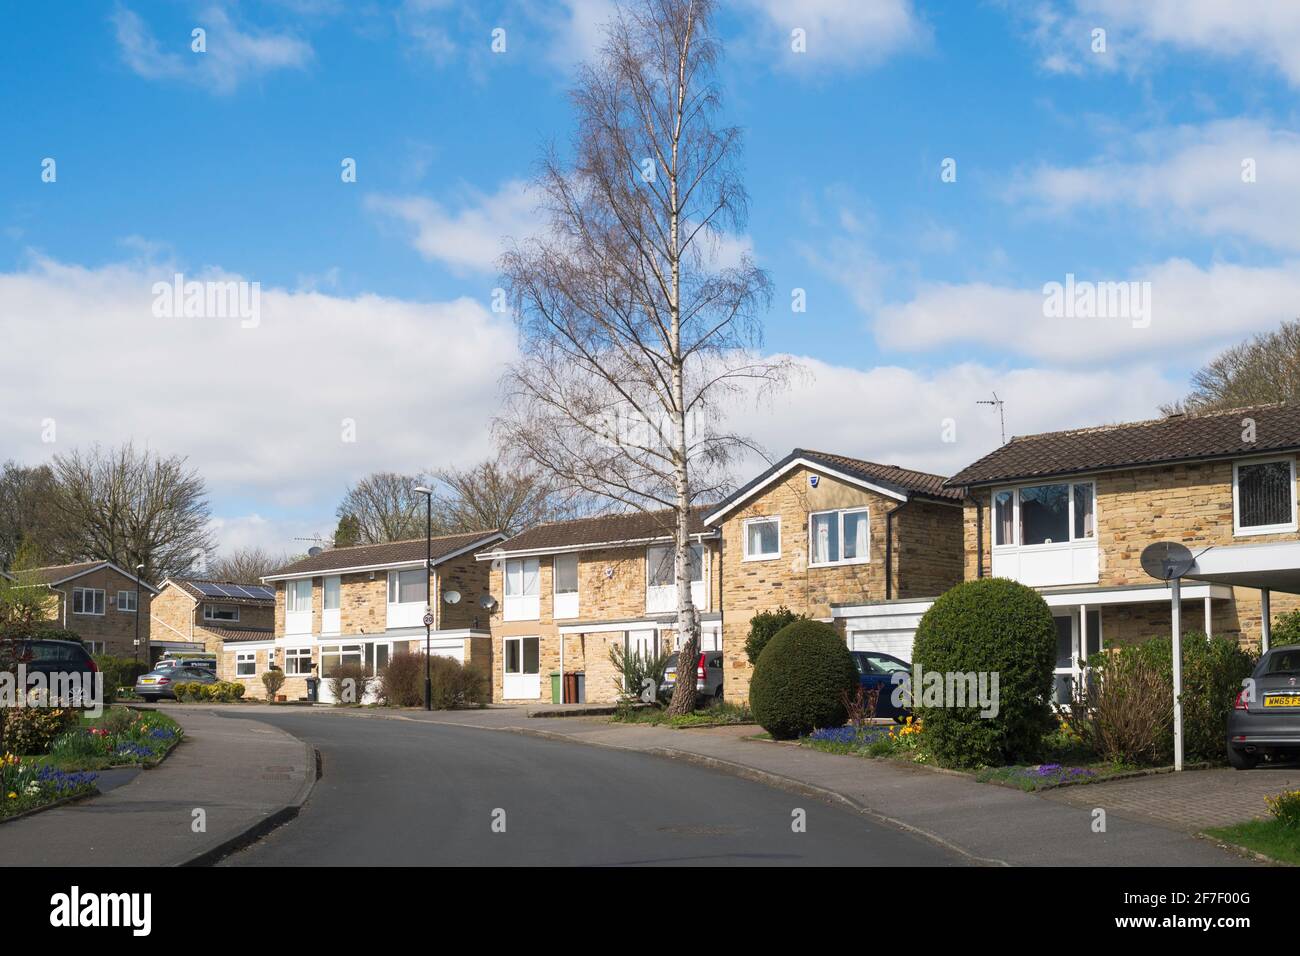 Tatham Way, late 20th century detached houses on a housing estate in Roundhay, Leeds, England, UK Stock Photo